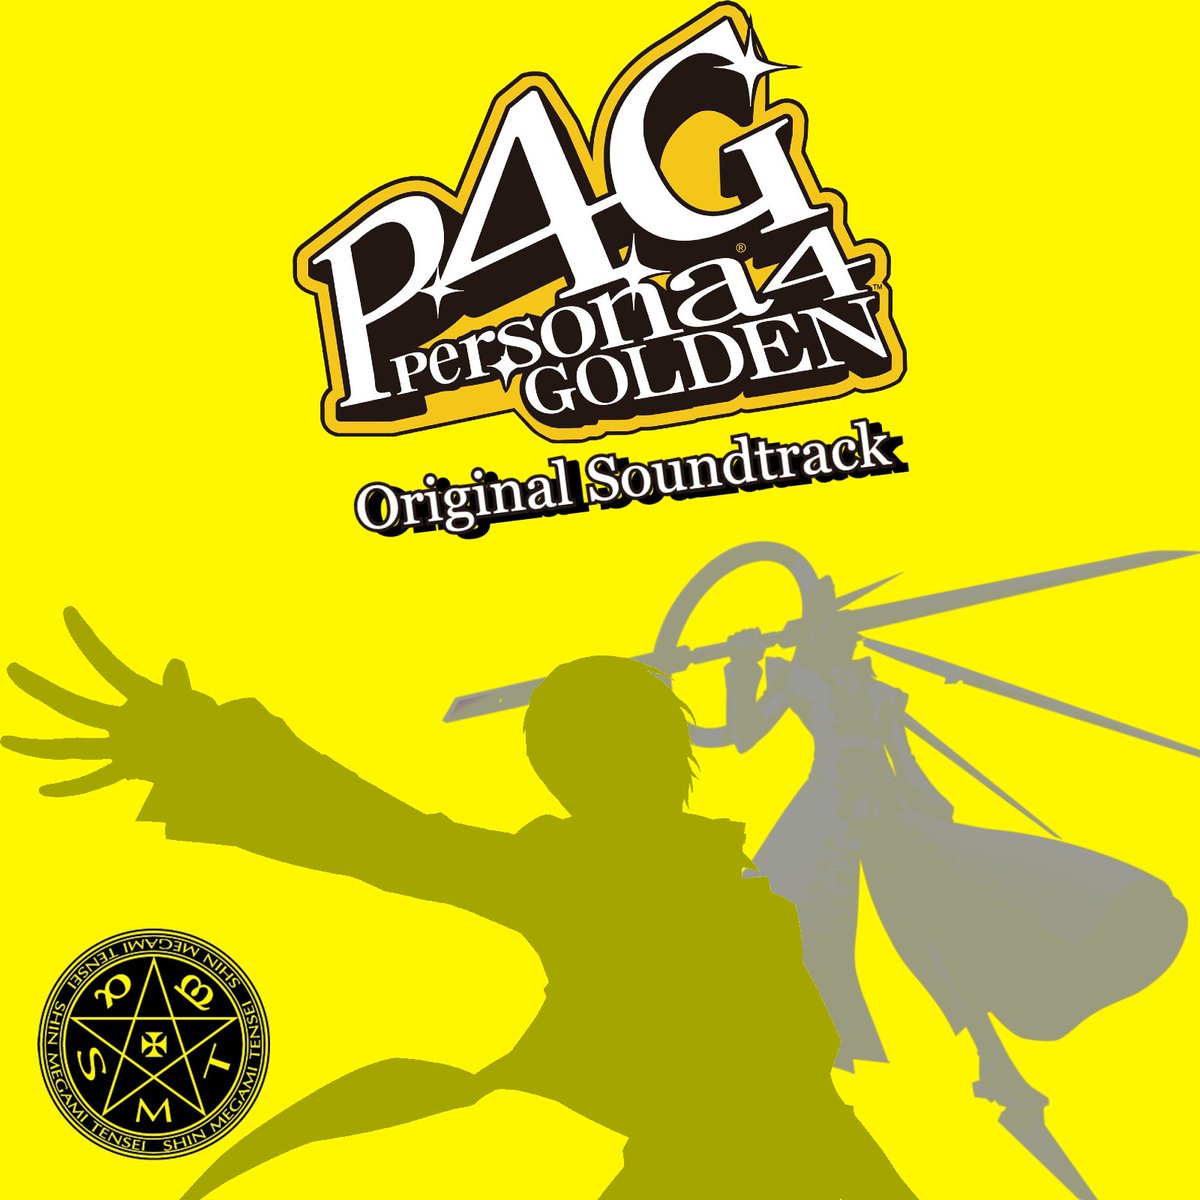 Karasu With The New Persona 4 Golden Release On Steam I Think It S Time To Re Release My Custom Ost Artworks For The Game For Anyone Who Bought The Digital Deluxe